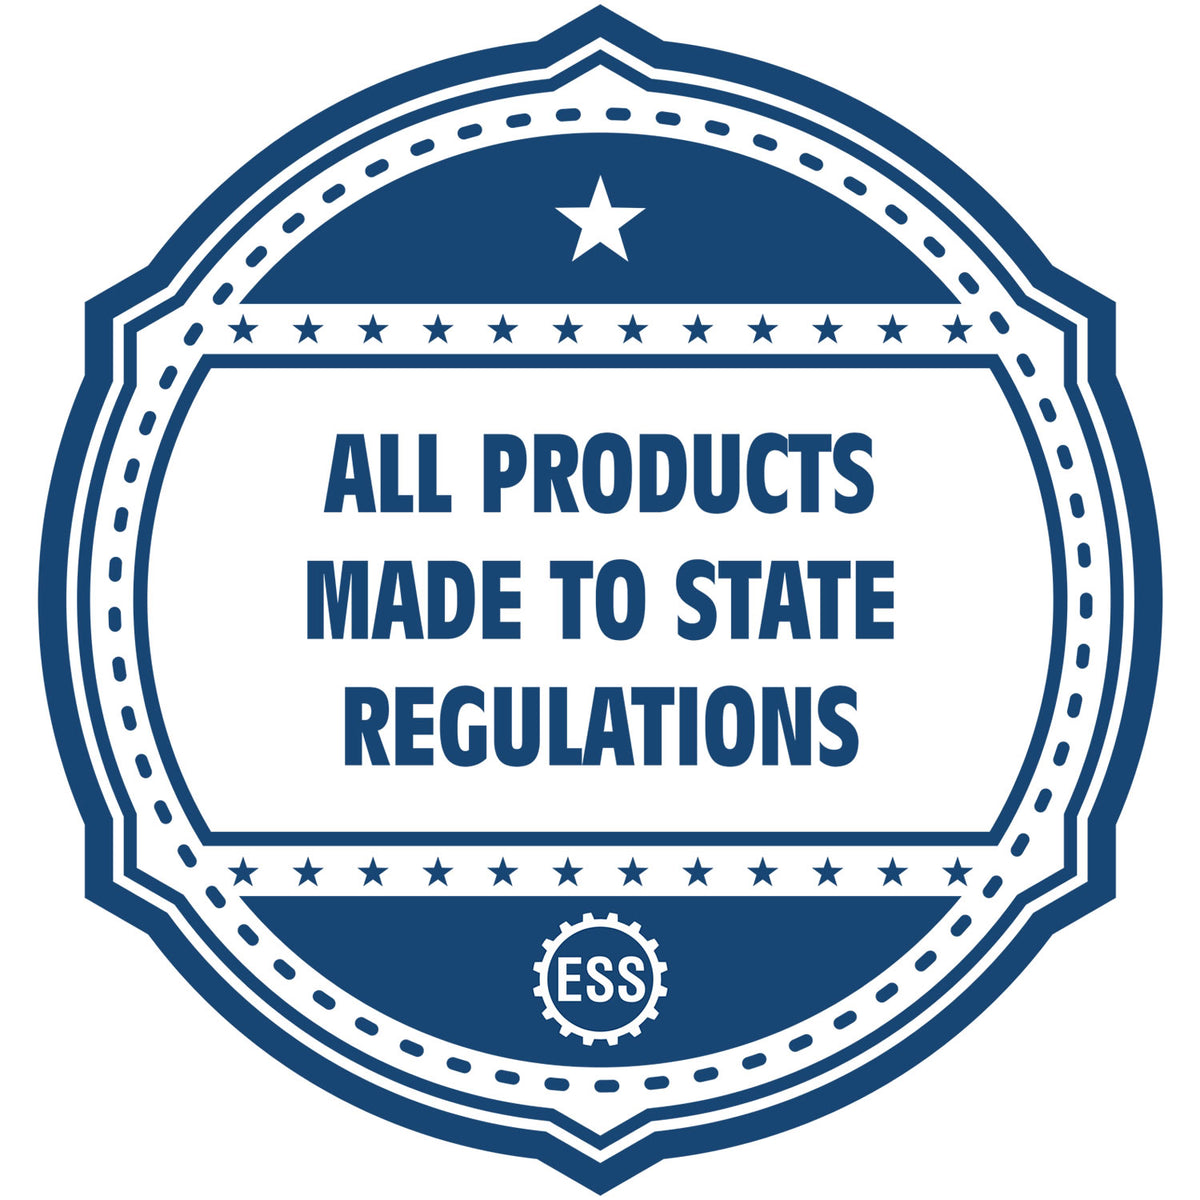 An icon or badge element for the Handheld Arizona Architect Seal Embosser showing that this product is made in compliance with state regulations.